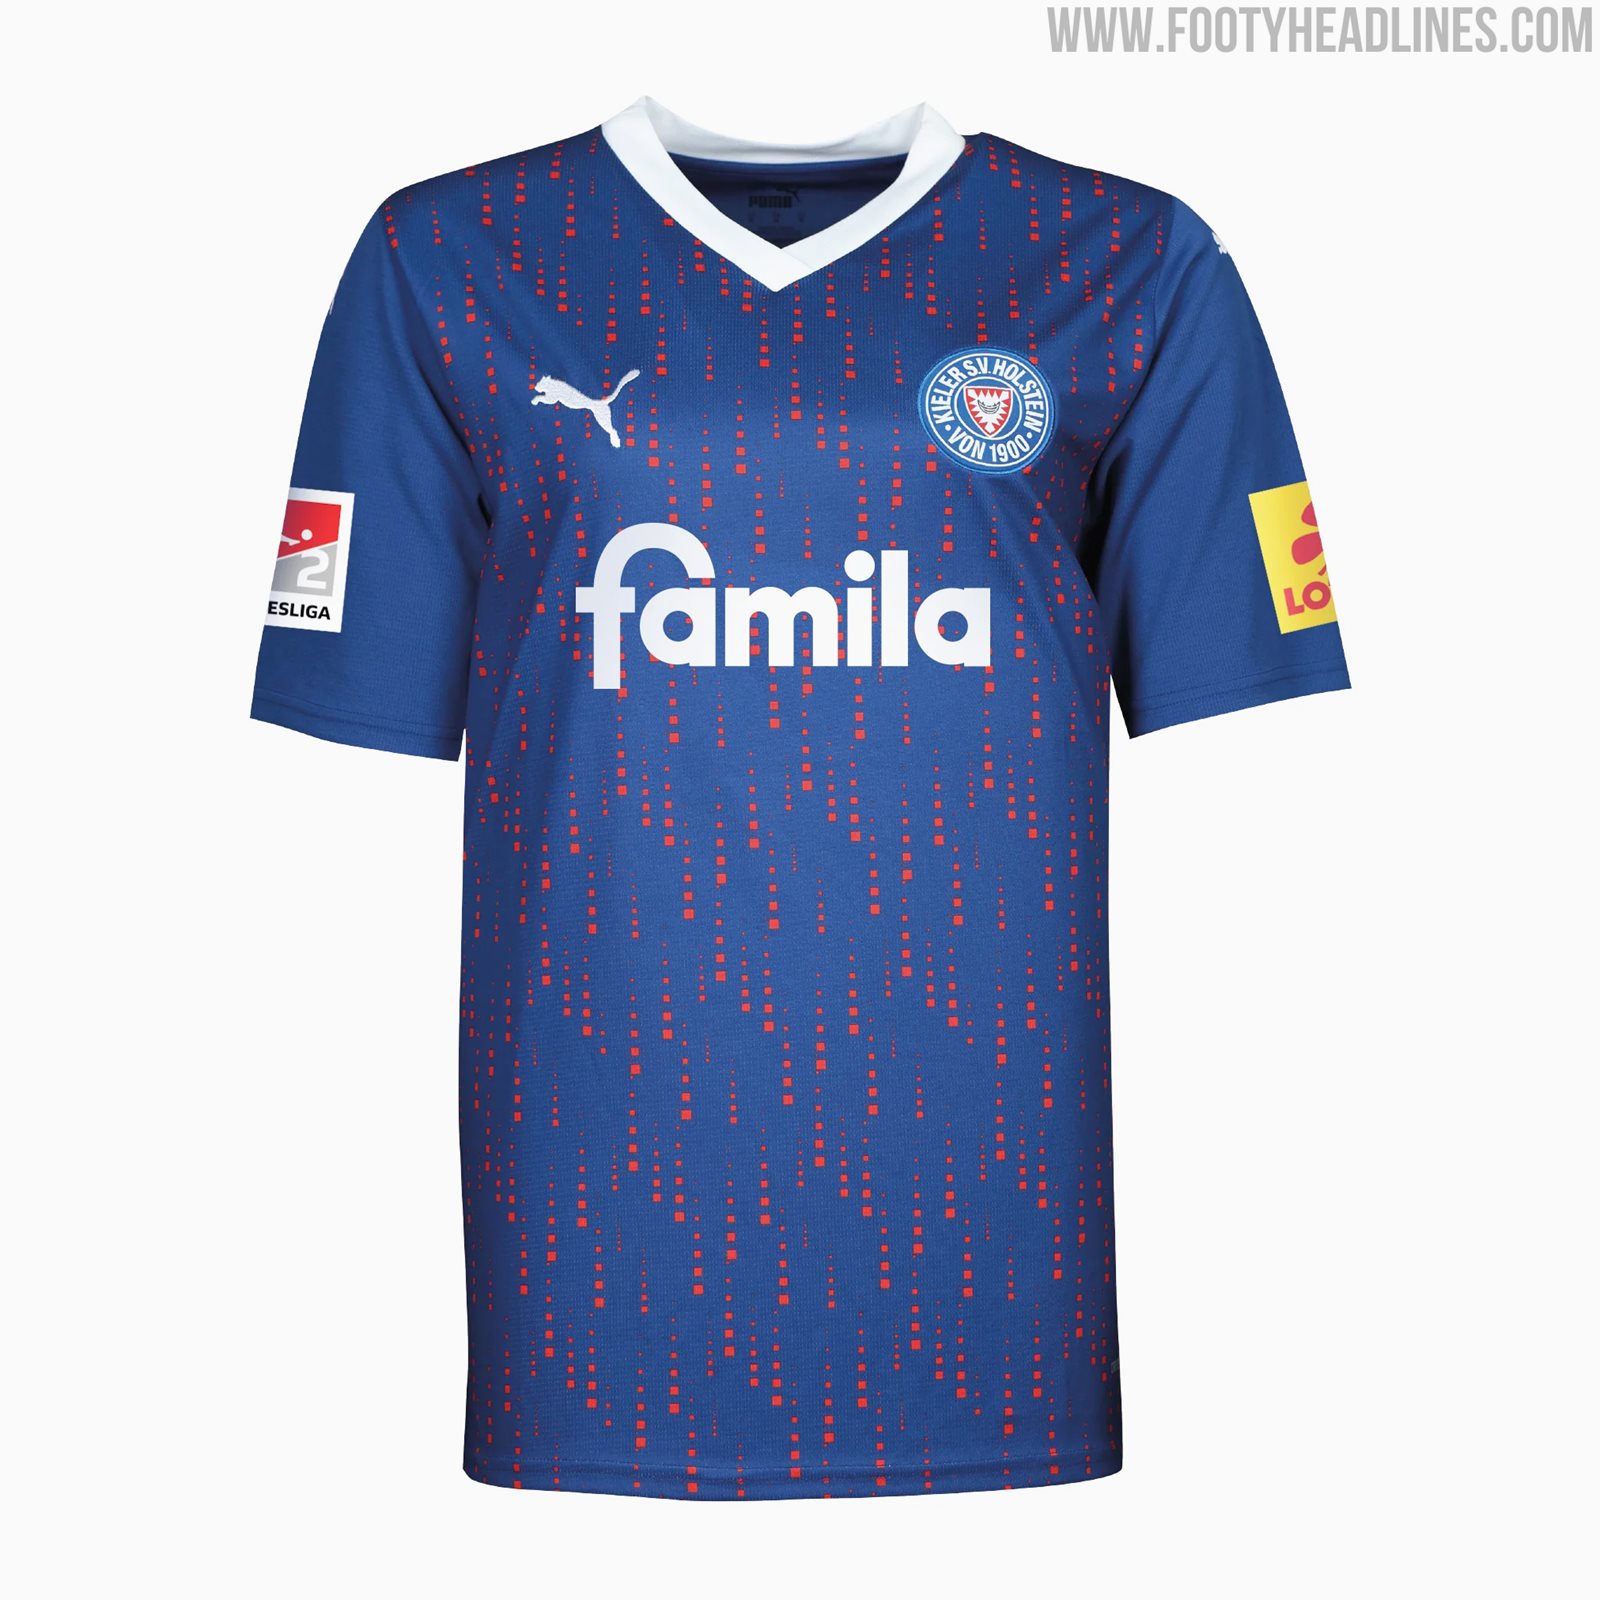 Holstein Kiel 23-24 Home, Away & Third Kits Released - Construction-Inspired  Special Kit Carried Over - Footy Headlines